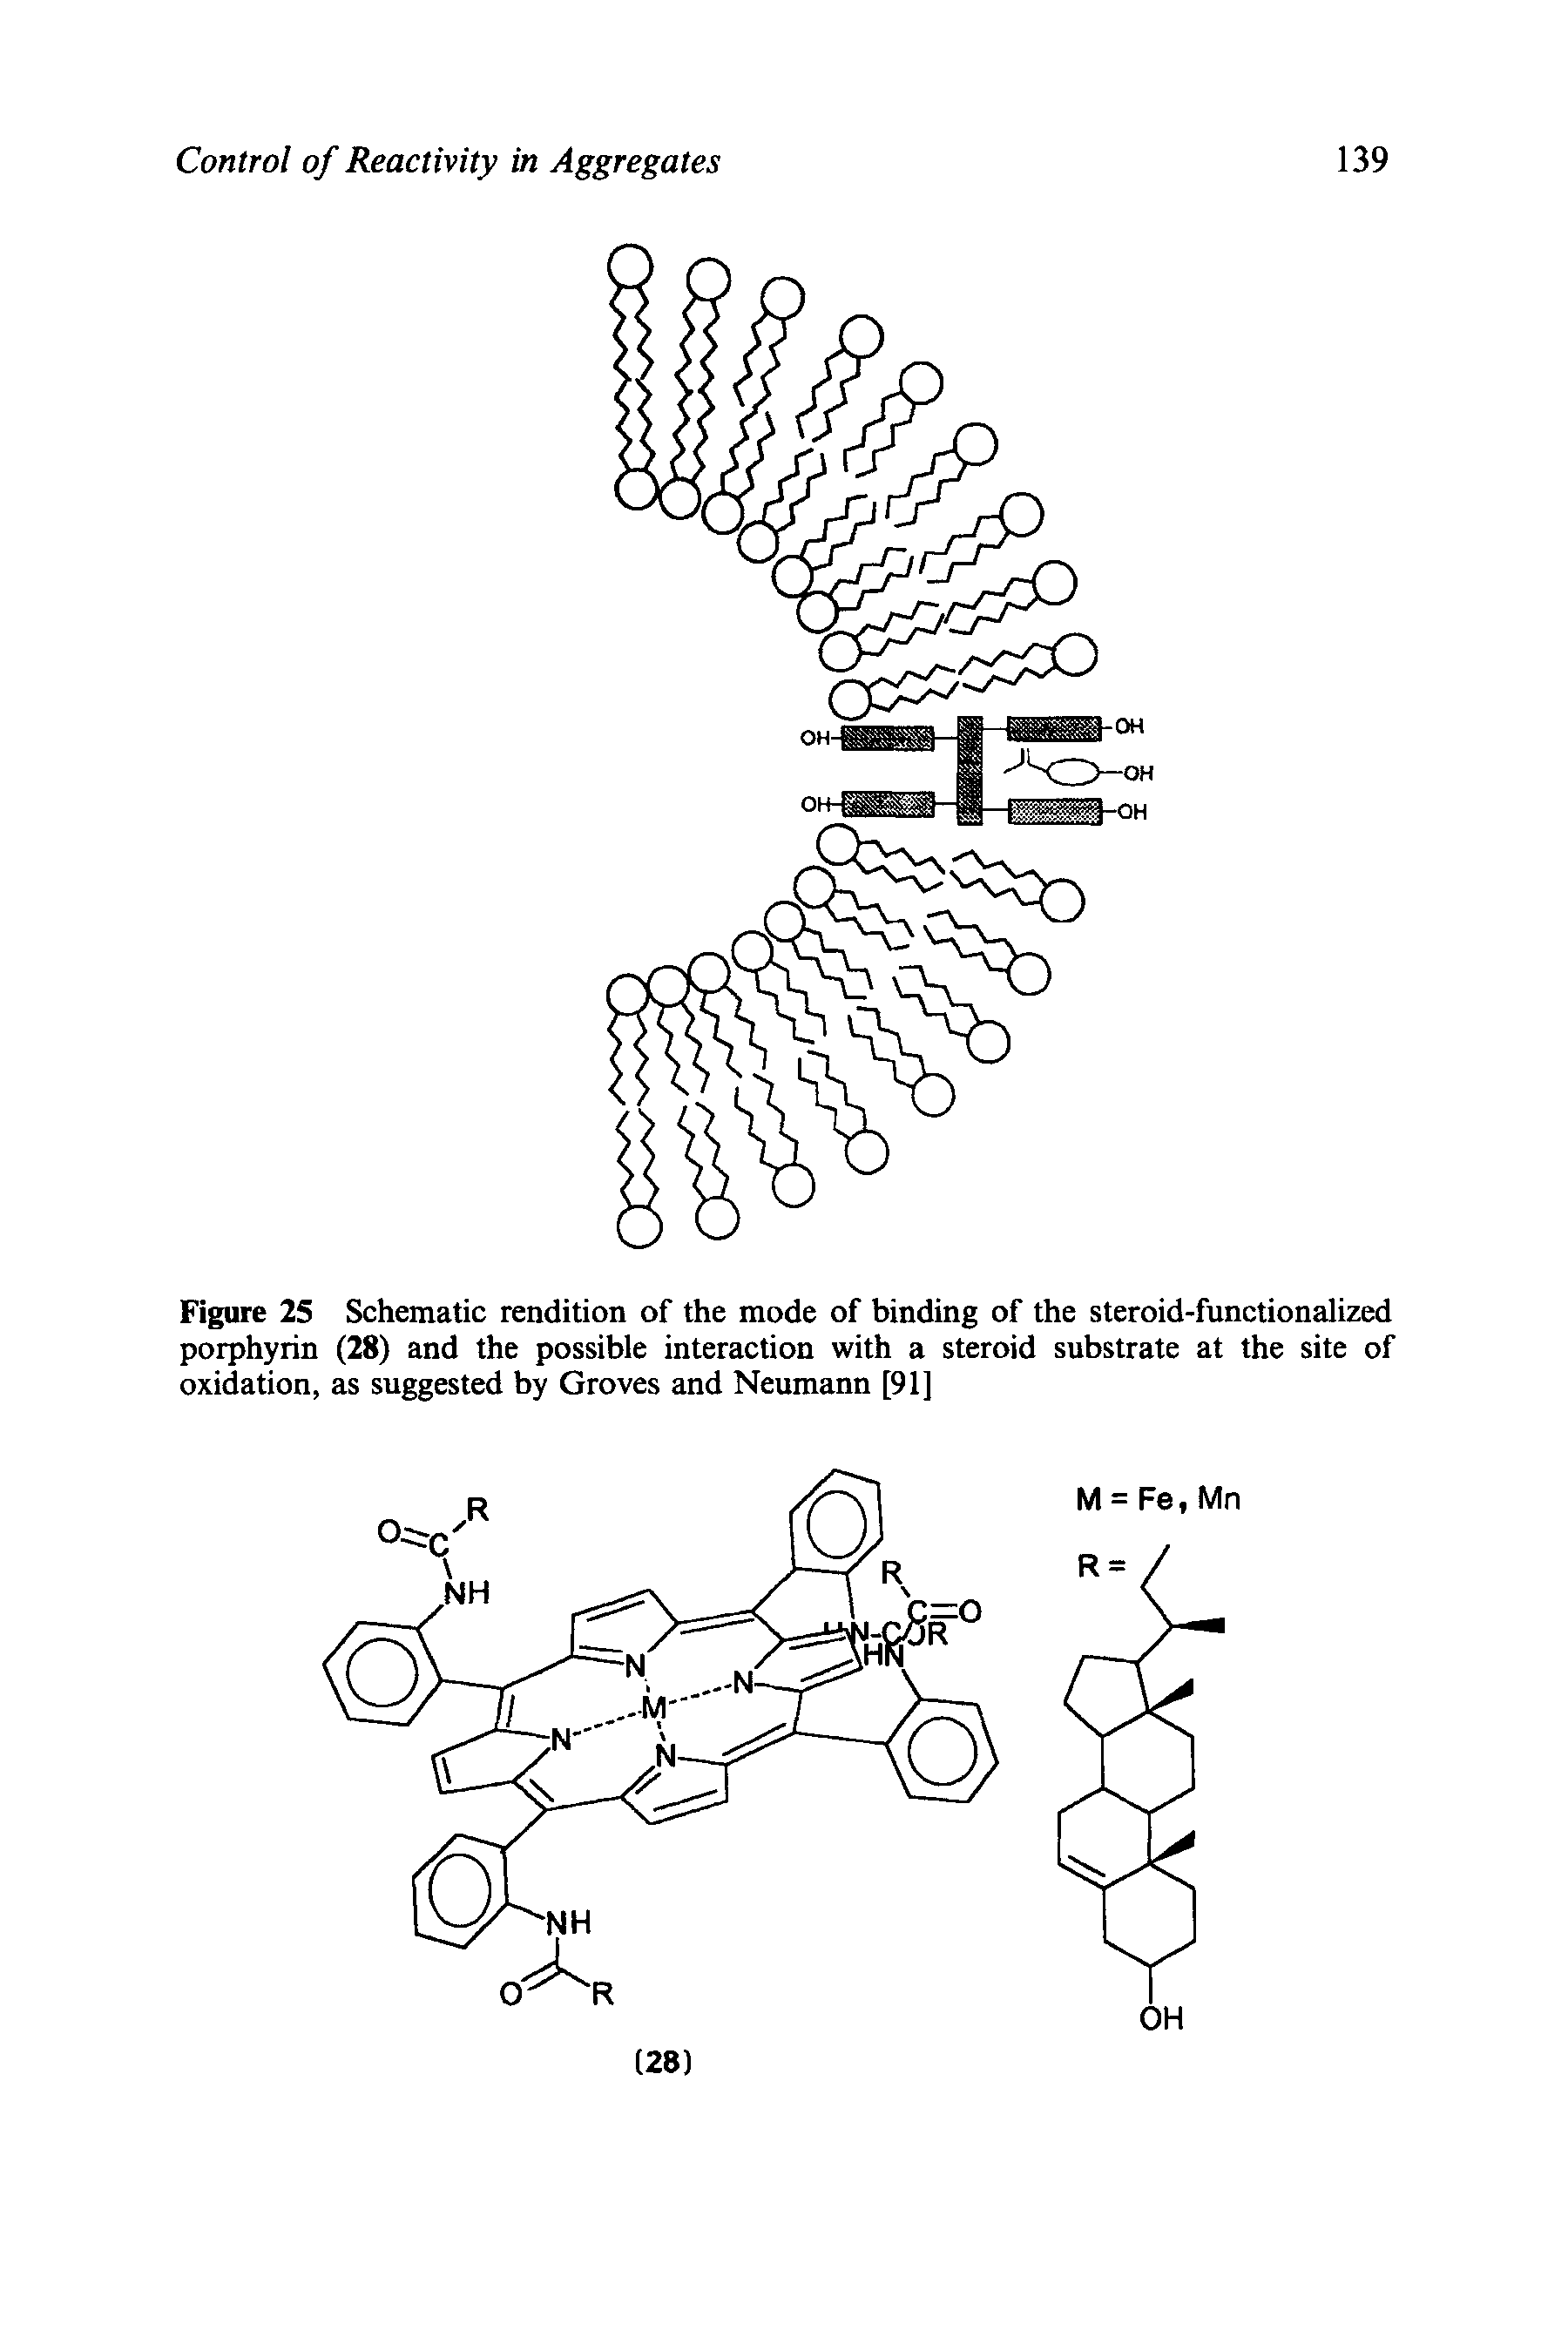 Figure 25 Schematic rendition of the mode of binding of the steroid-functionalized porphyrin (28) and the possible interaction with a steroid substrate at the site of oxidation, as suggested by Groves and Neumann [91]...